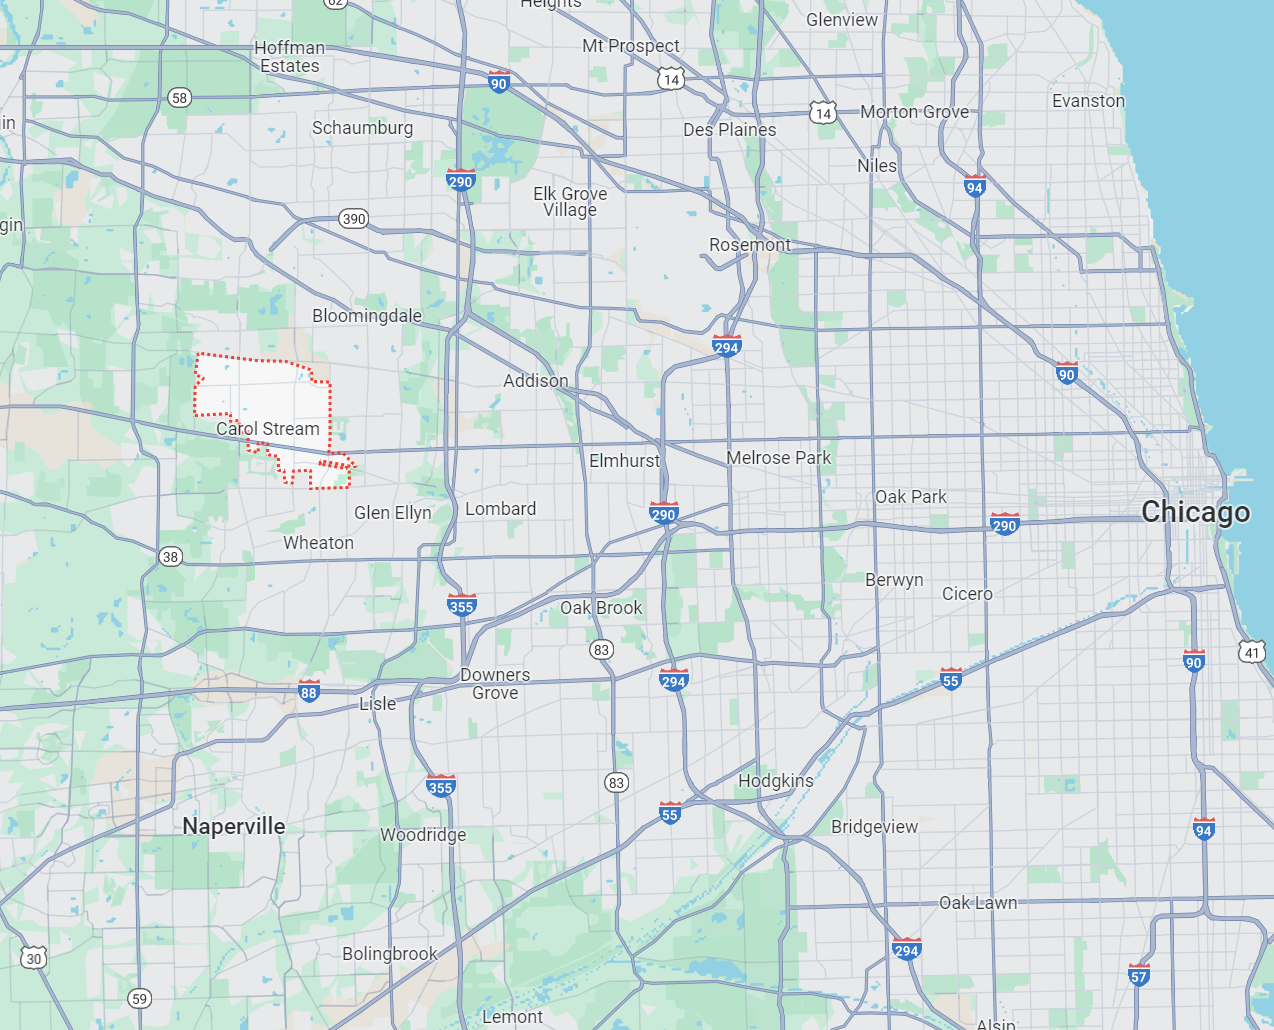 Party Bus Services Area Map in Carol Stream Illinois